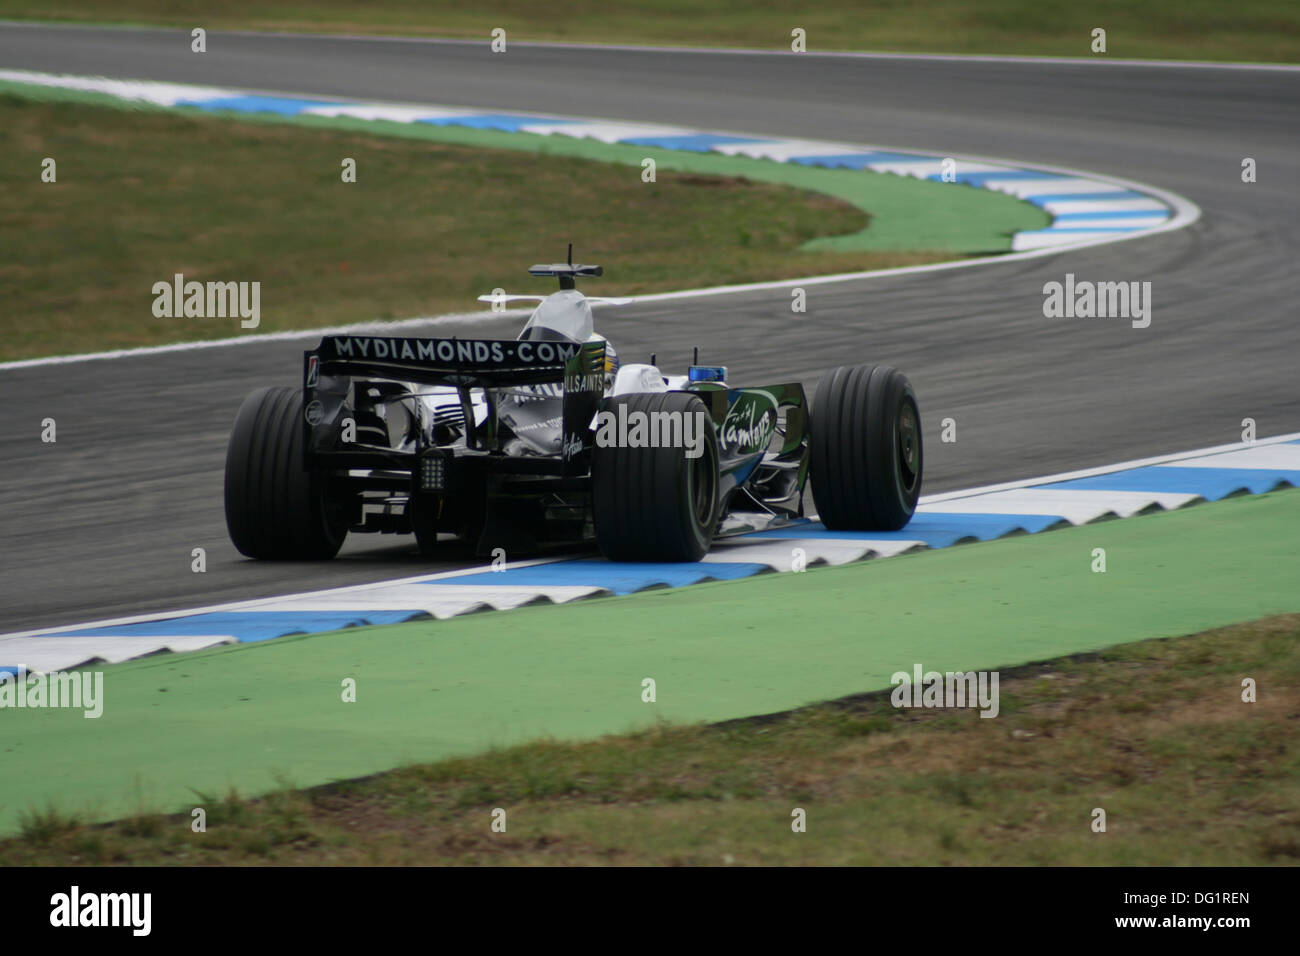 Nico Rosberg in Williams during formula 1 testing on Hockenheimring in Germany on 8th July 2008 Stock Photo